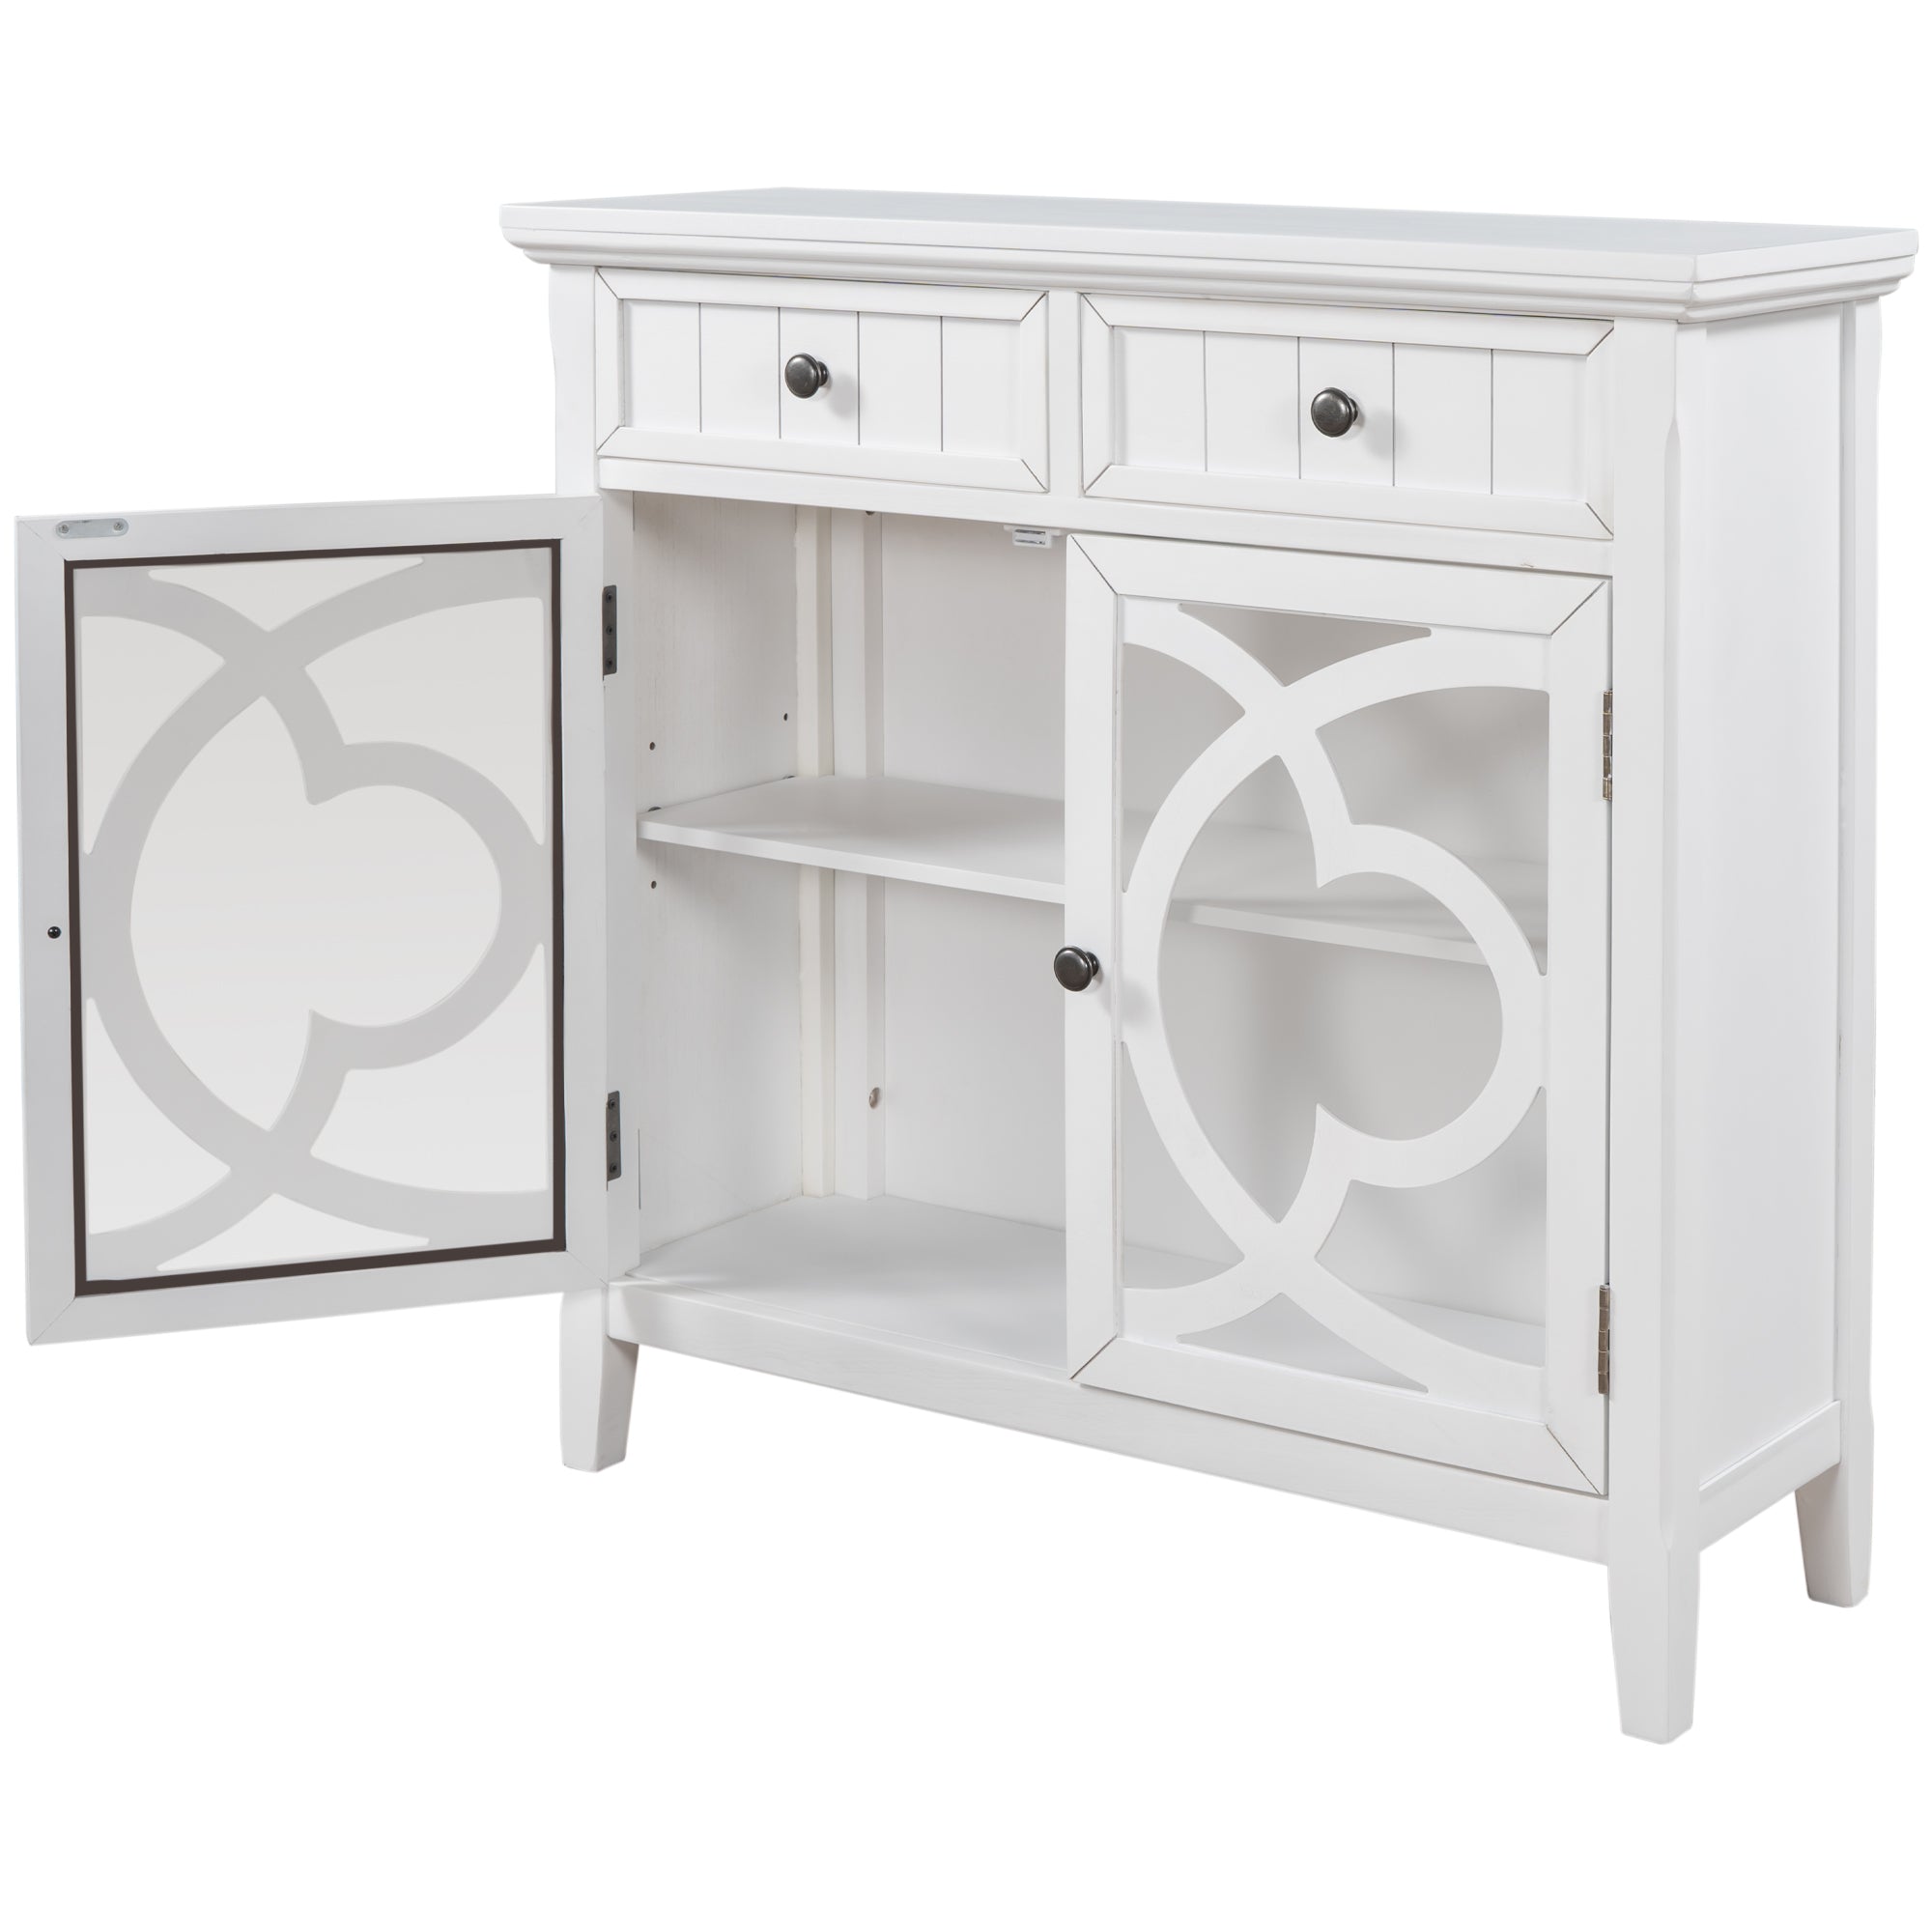 Accent Storage Cabinet Wooden Cabinet with Adjustable Shelf (White)